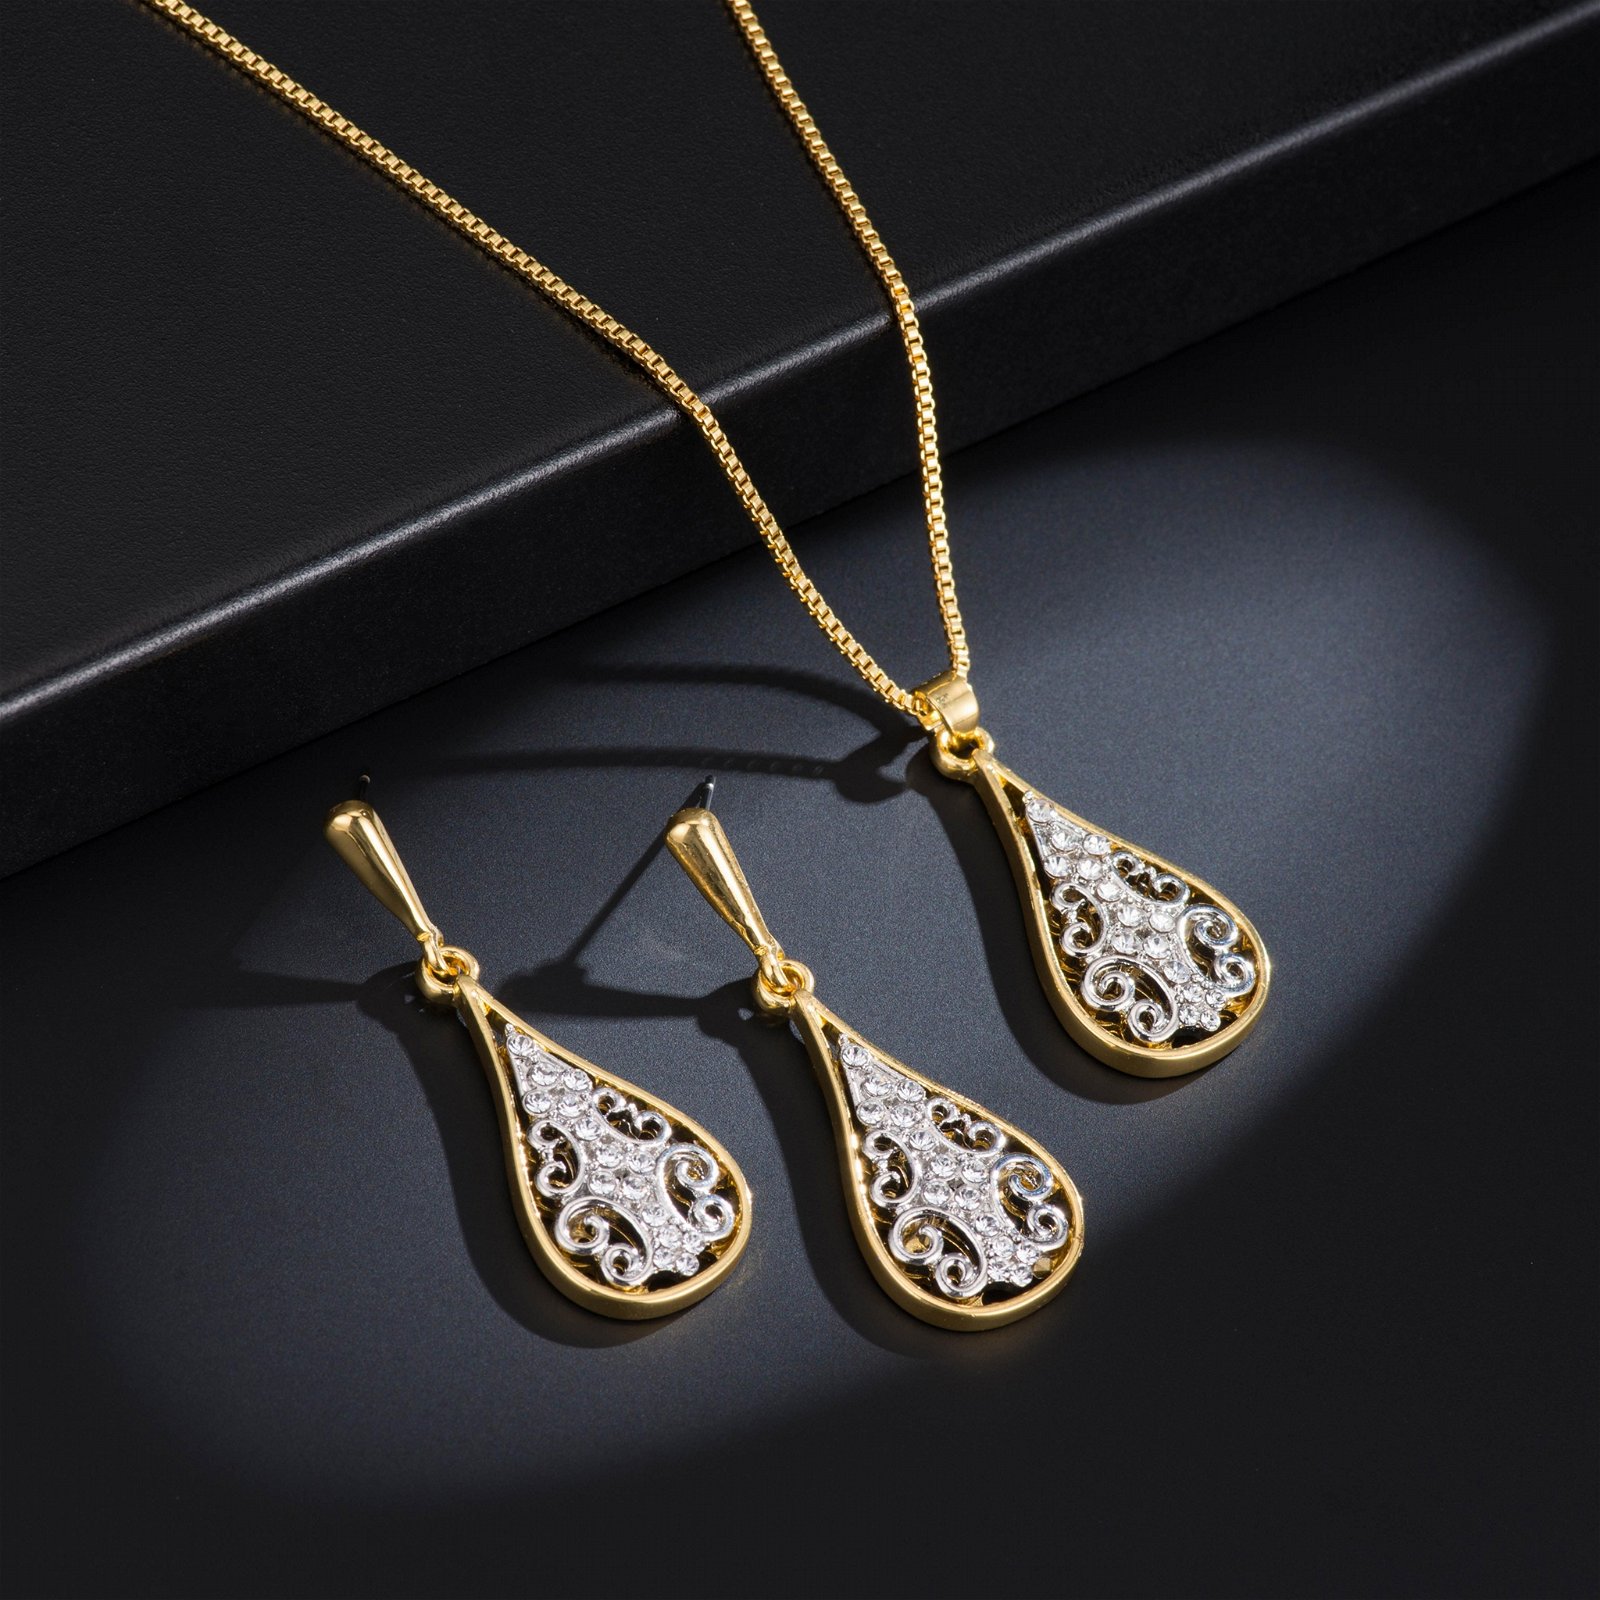 Fashion Accessories of Necklace  Earrings Set 